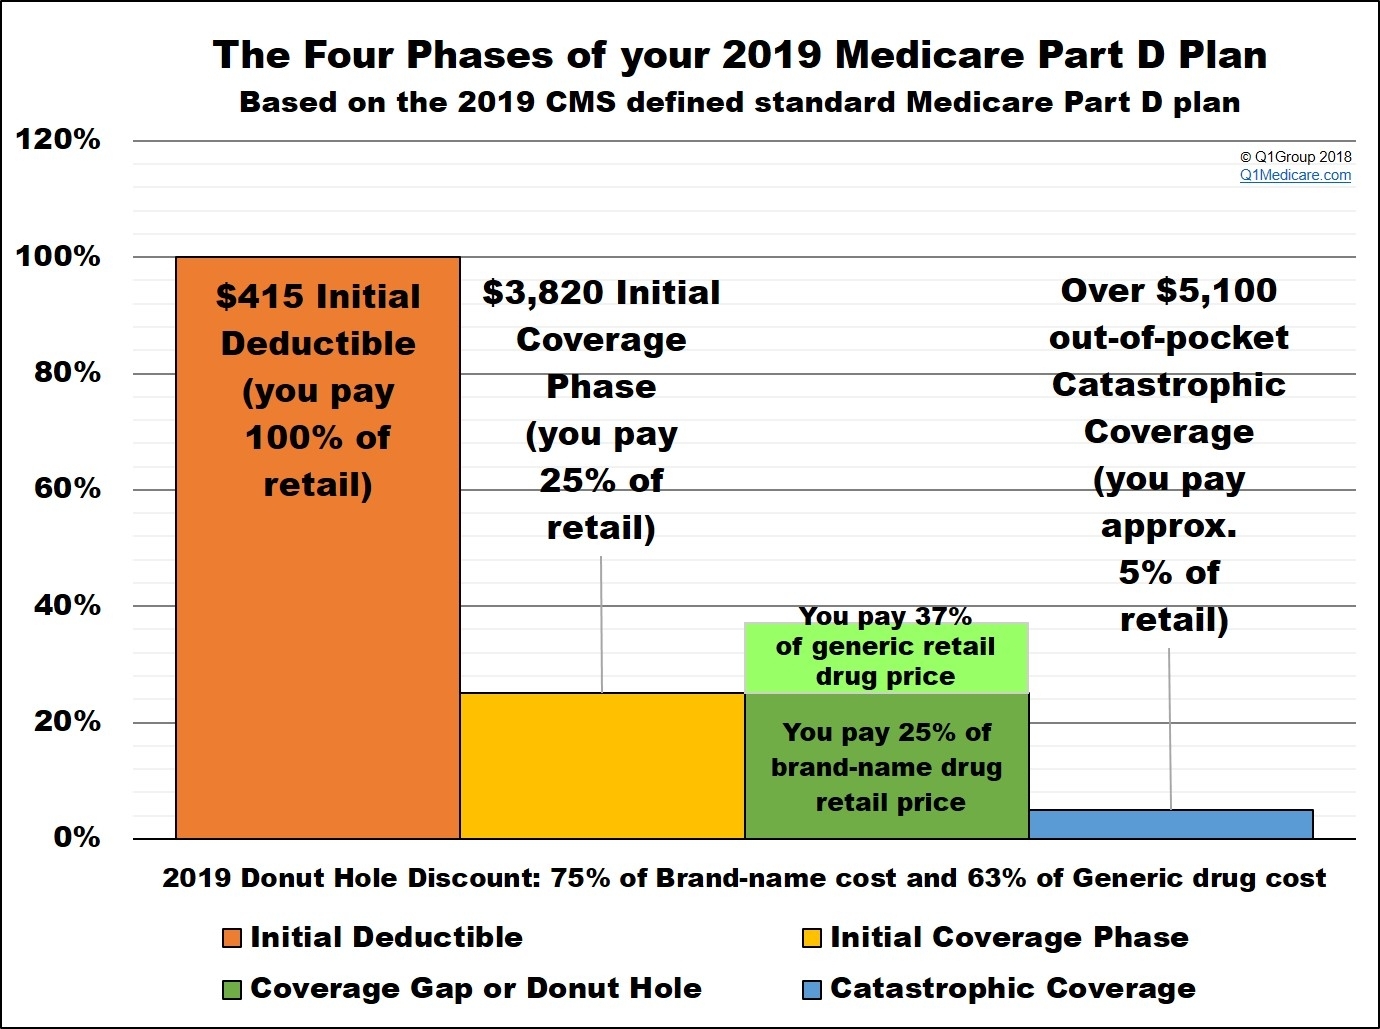 What Is The 2019 Standard Initial Coverage Limit And How